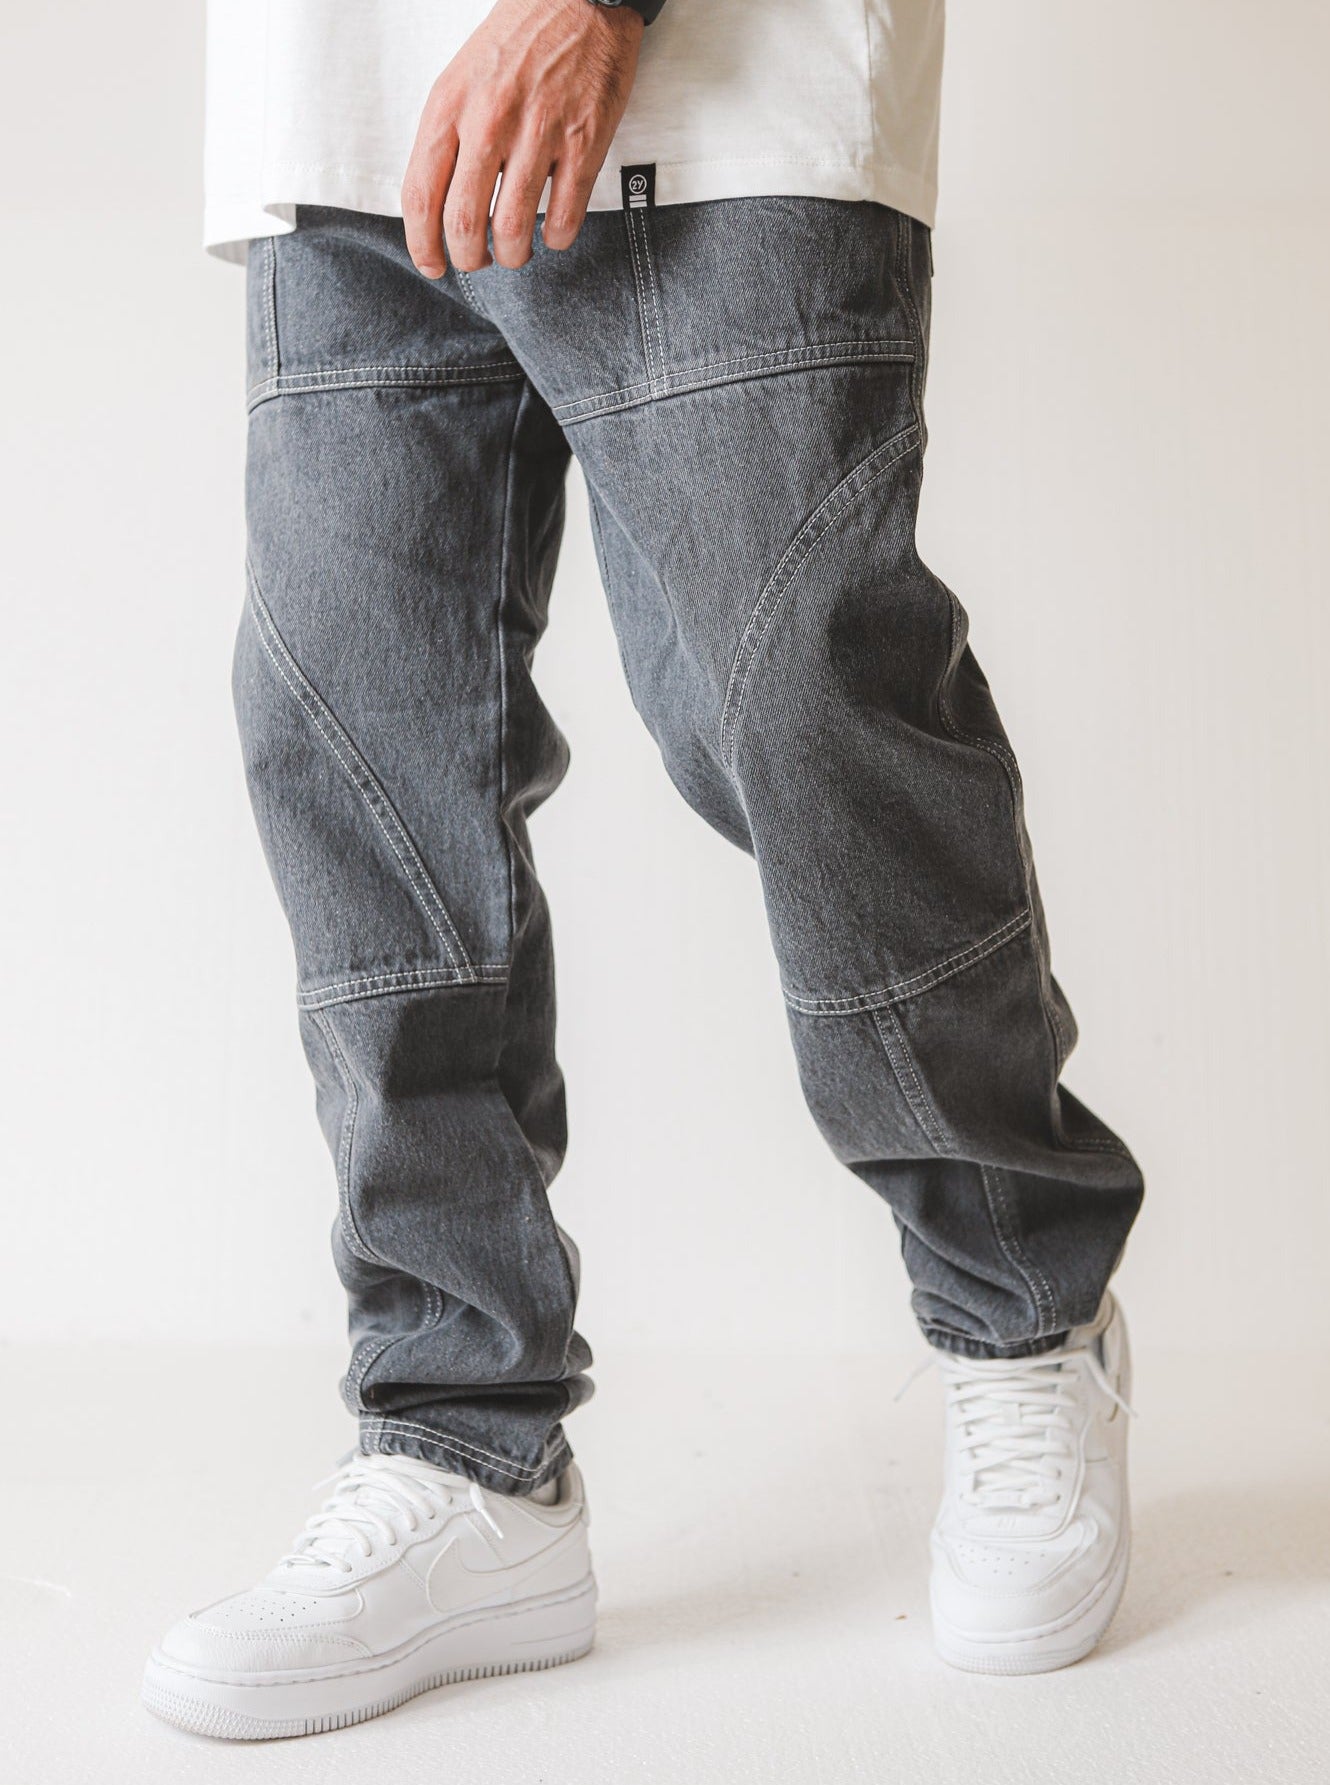 Premium Straight-Fit Grey Detailed Jeans - UNEFFECTED STUDIOS® - JEANS - UNEFFECTED STUDIOS®